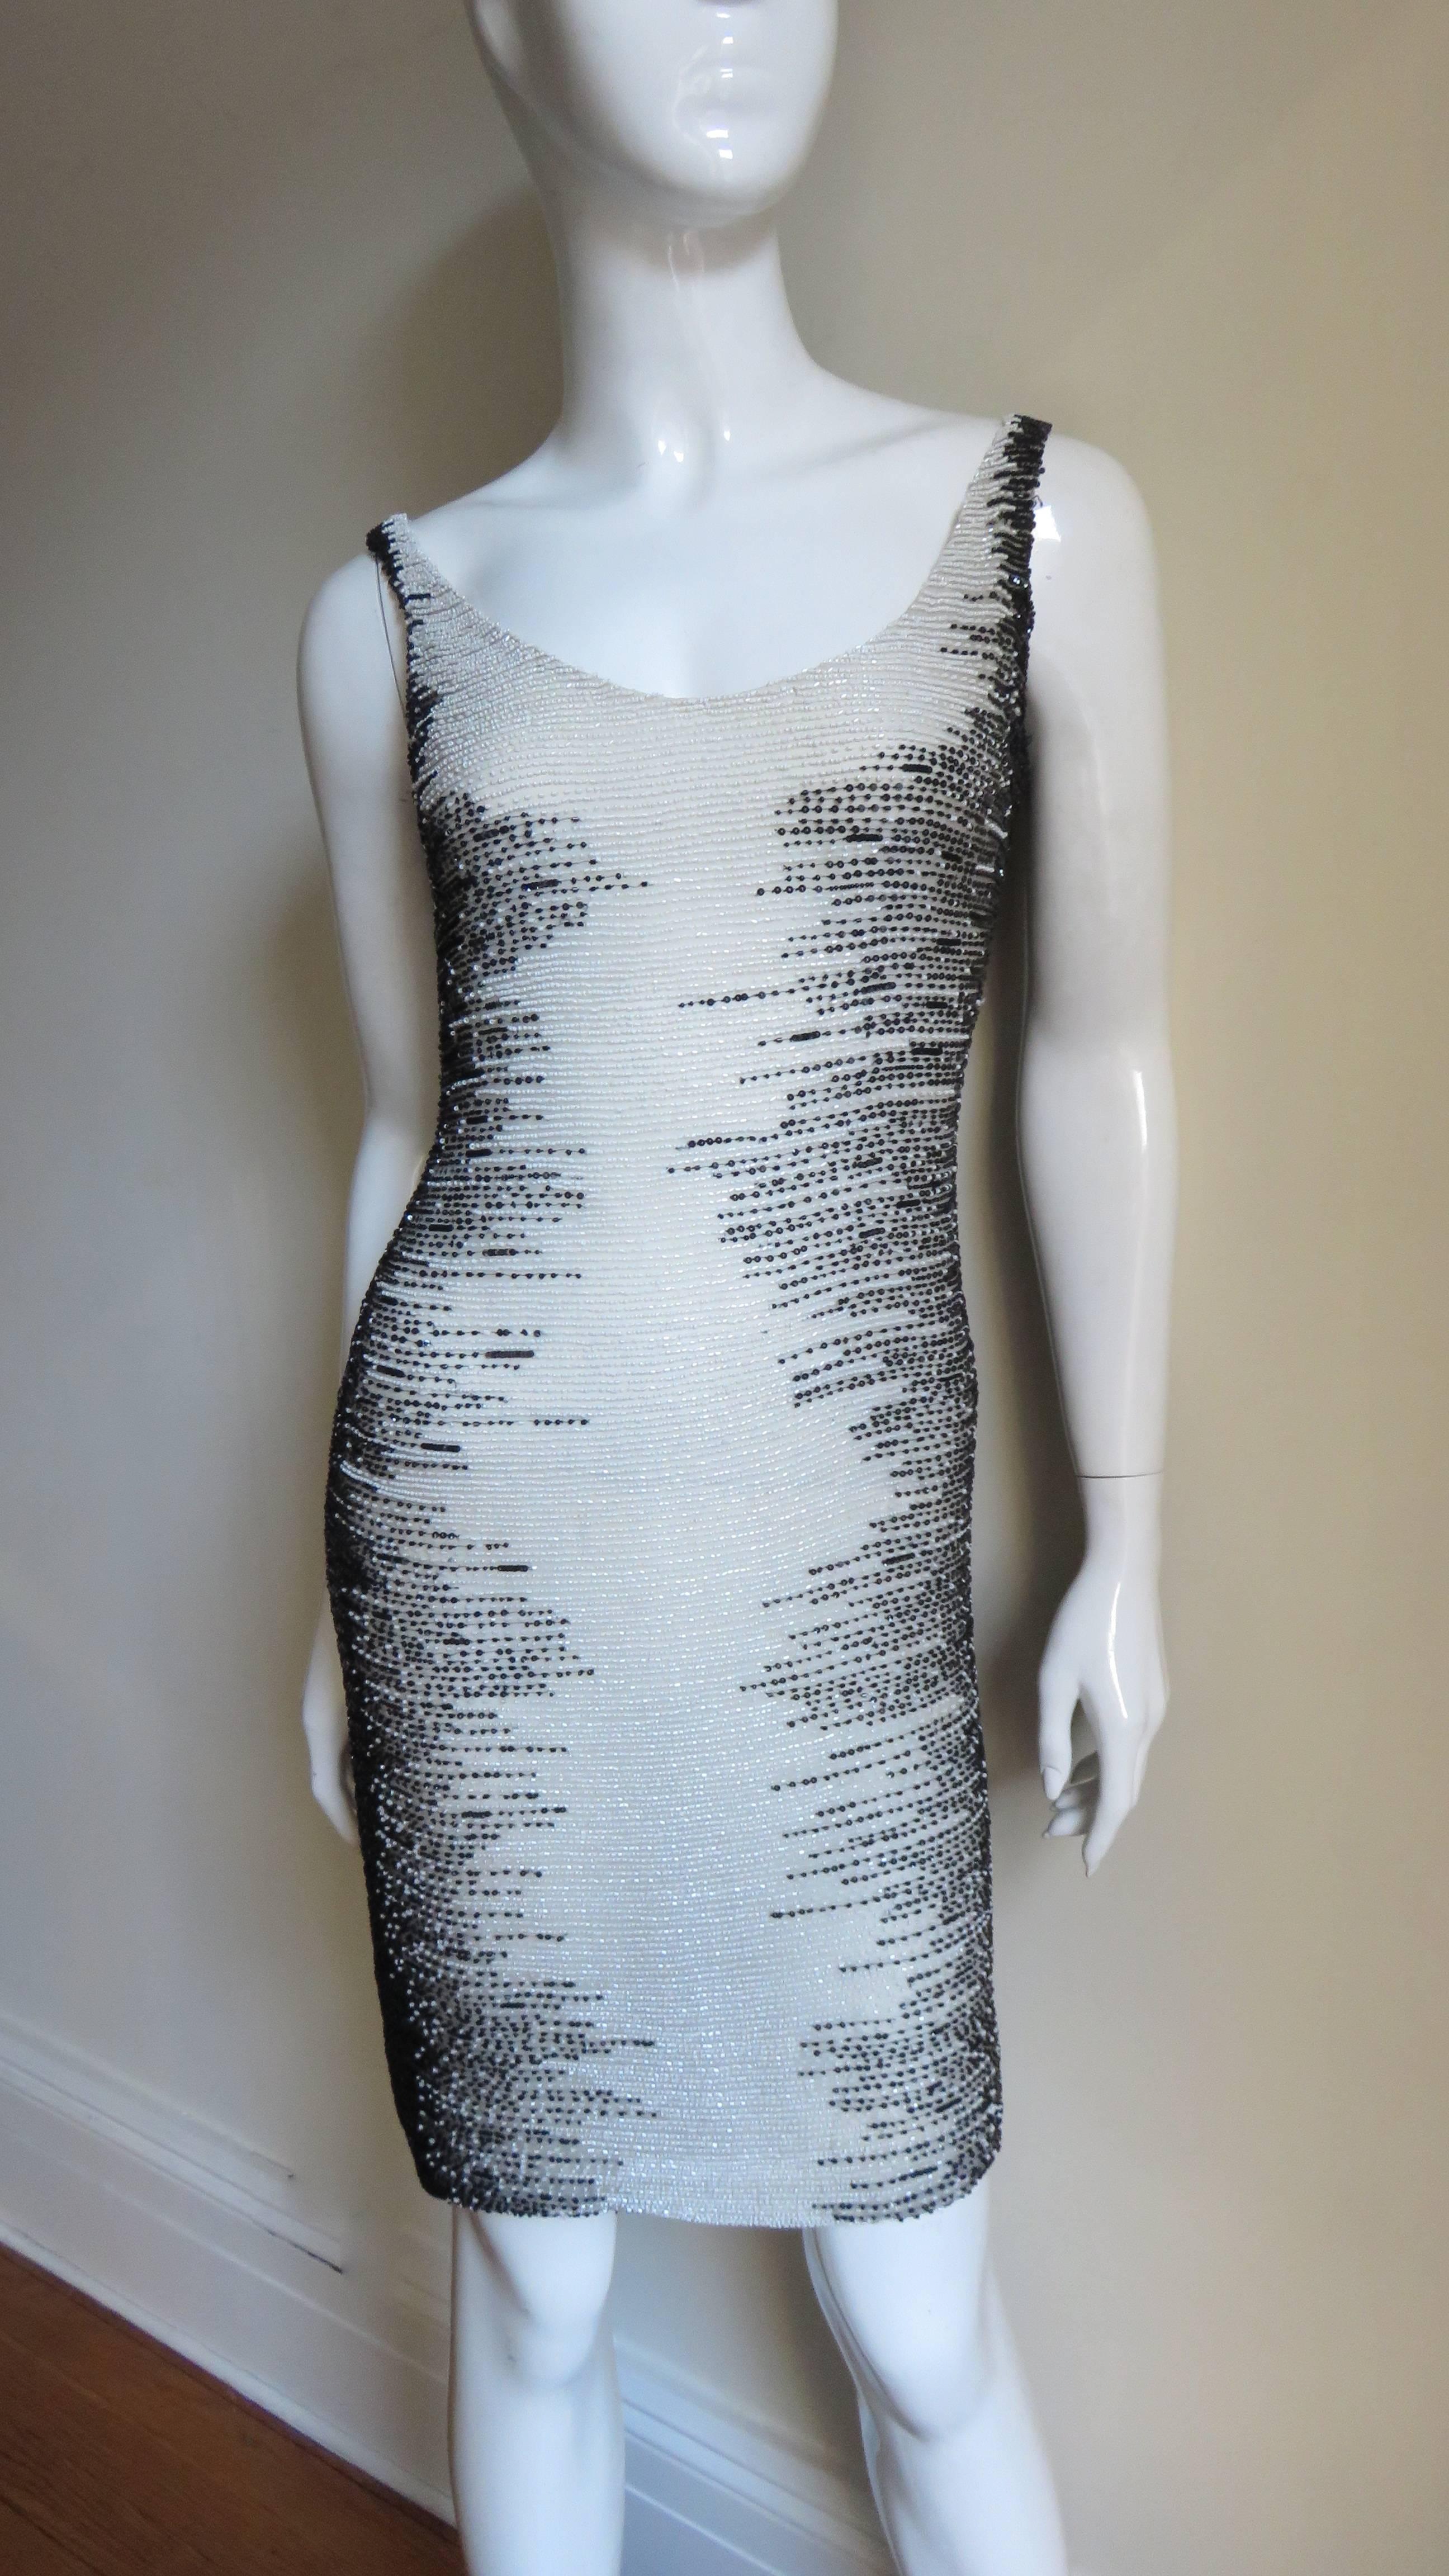 Valentino Boutique Black and White Beaded Dress In Good Condition For Sale In Water Mill, NY